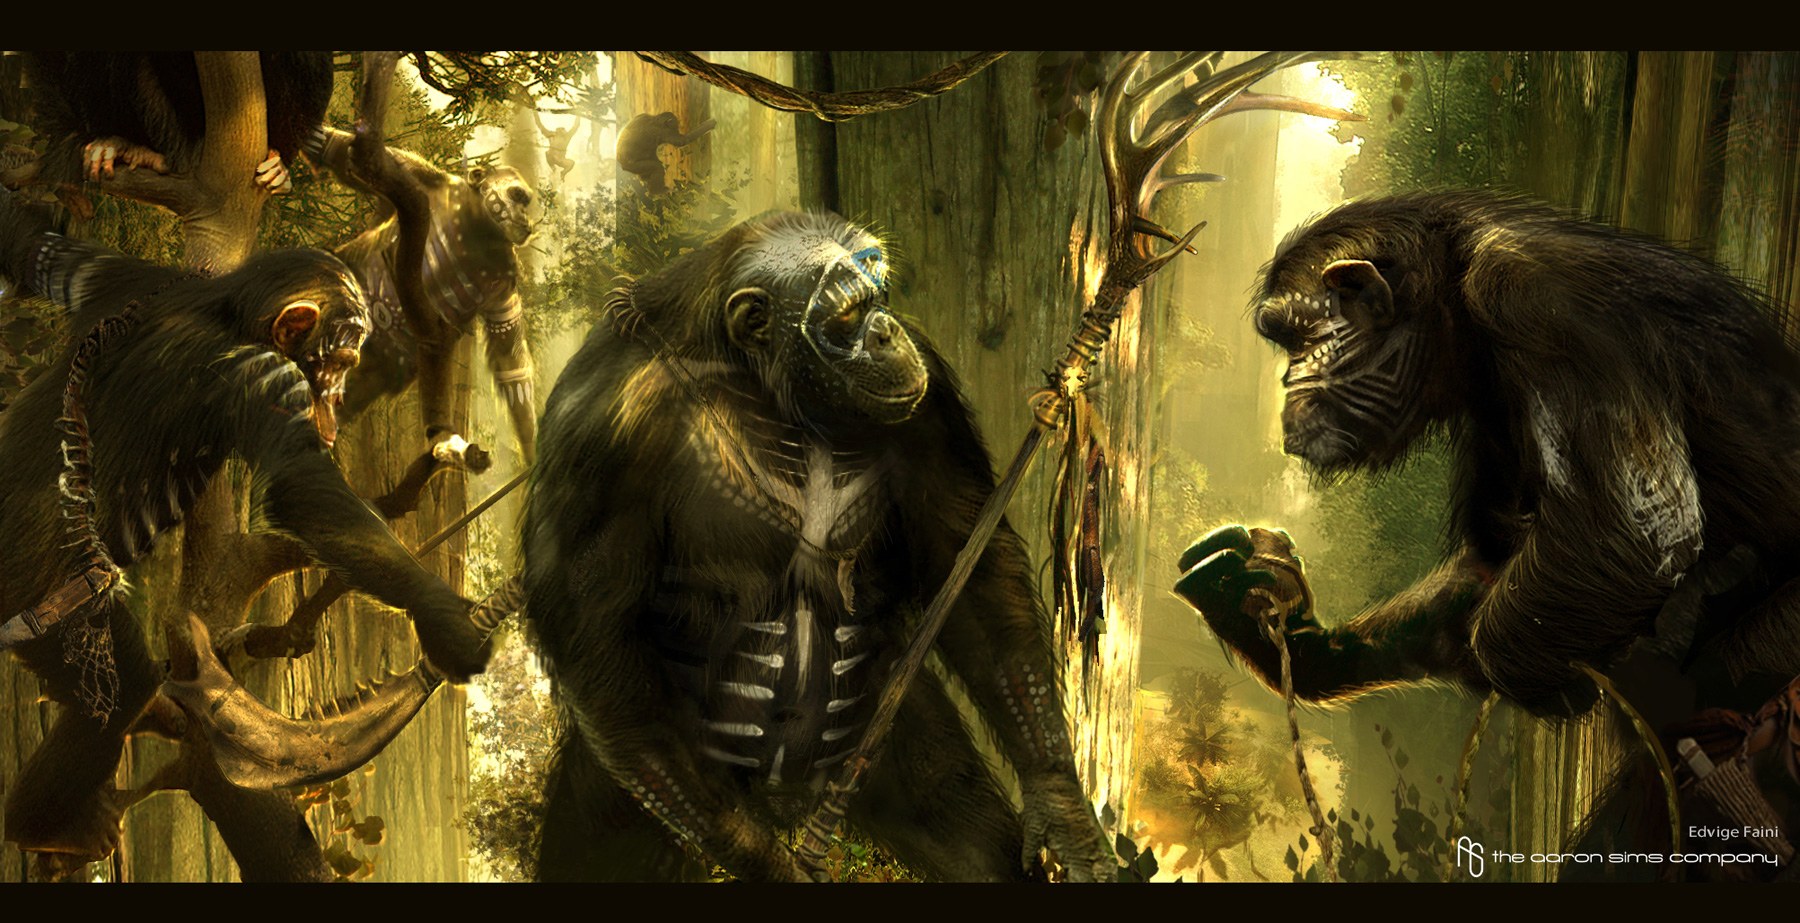 striking-concept-art-from-dawn-of-the-planet-of-the-apes5.jpg